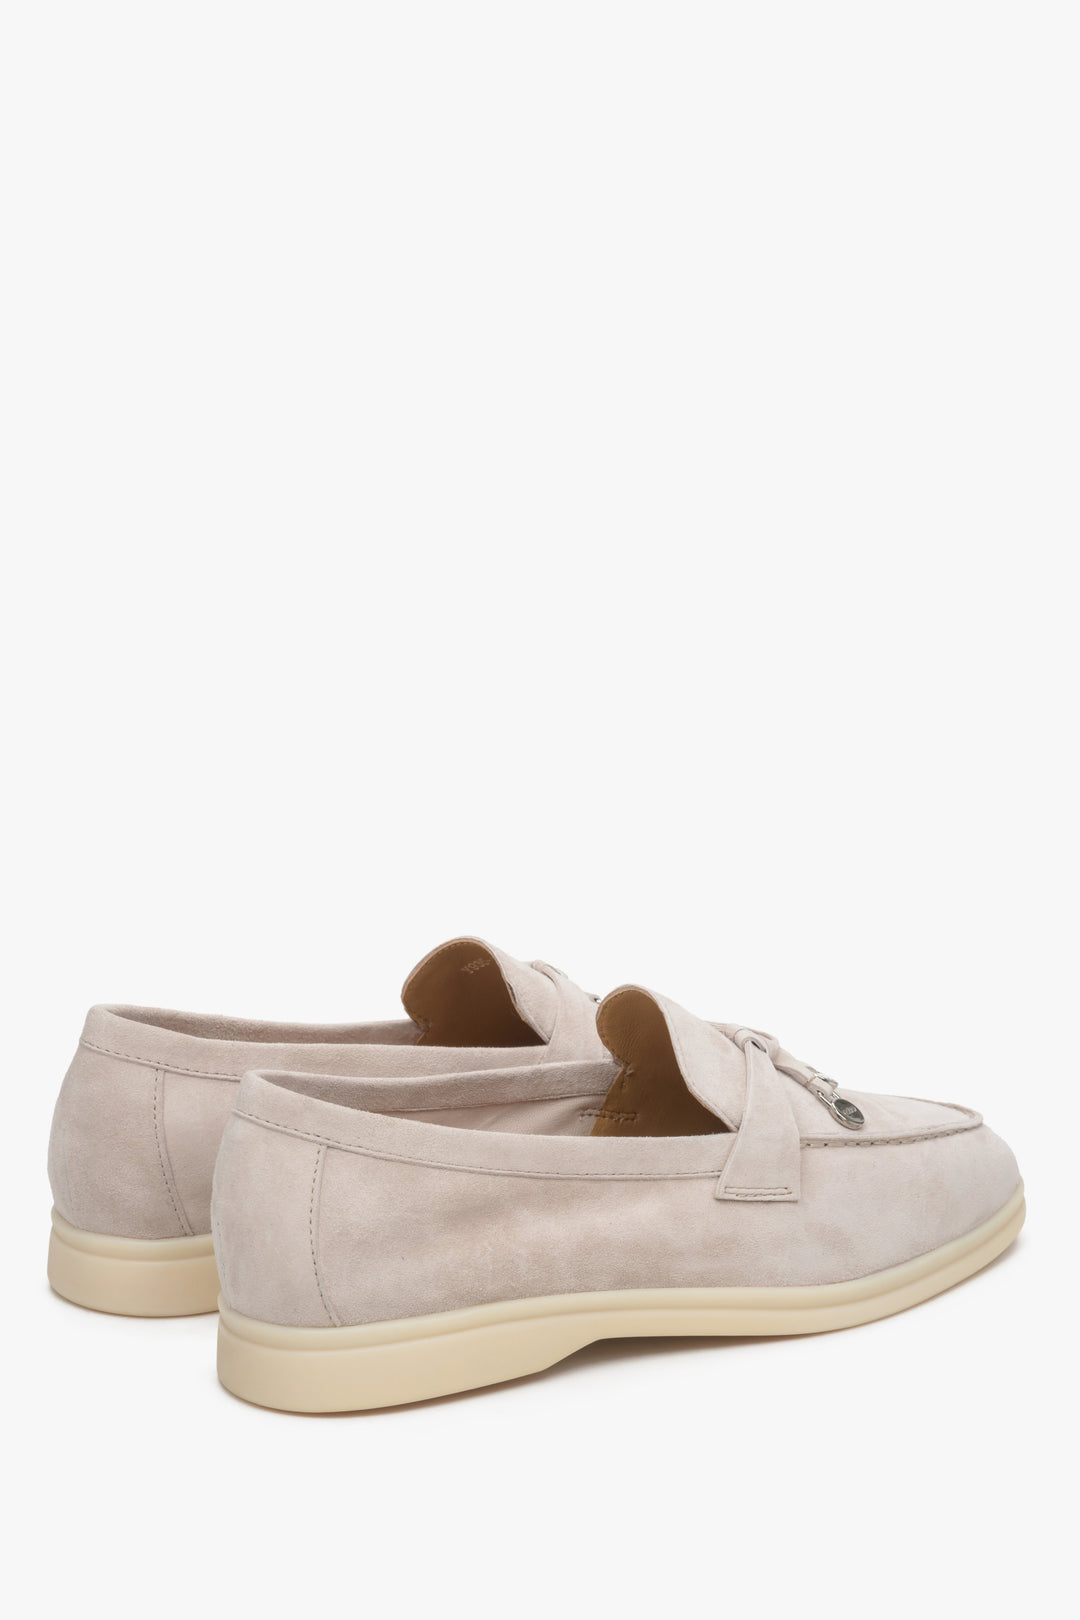 Light beige women's loafers made of natural velour and leather - close up on heel counter.